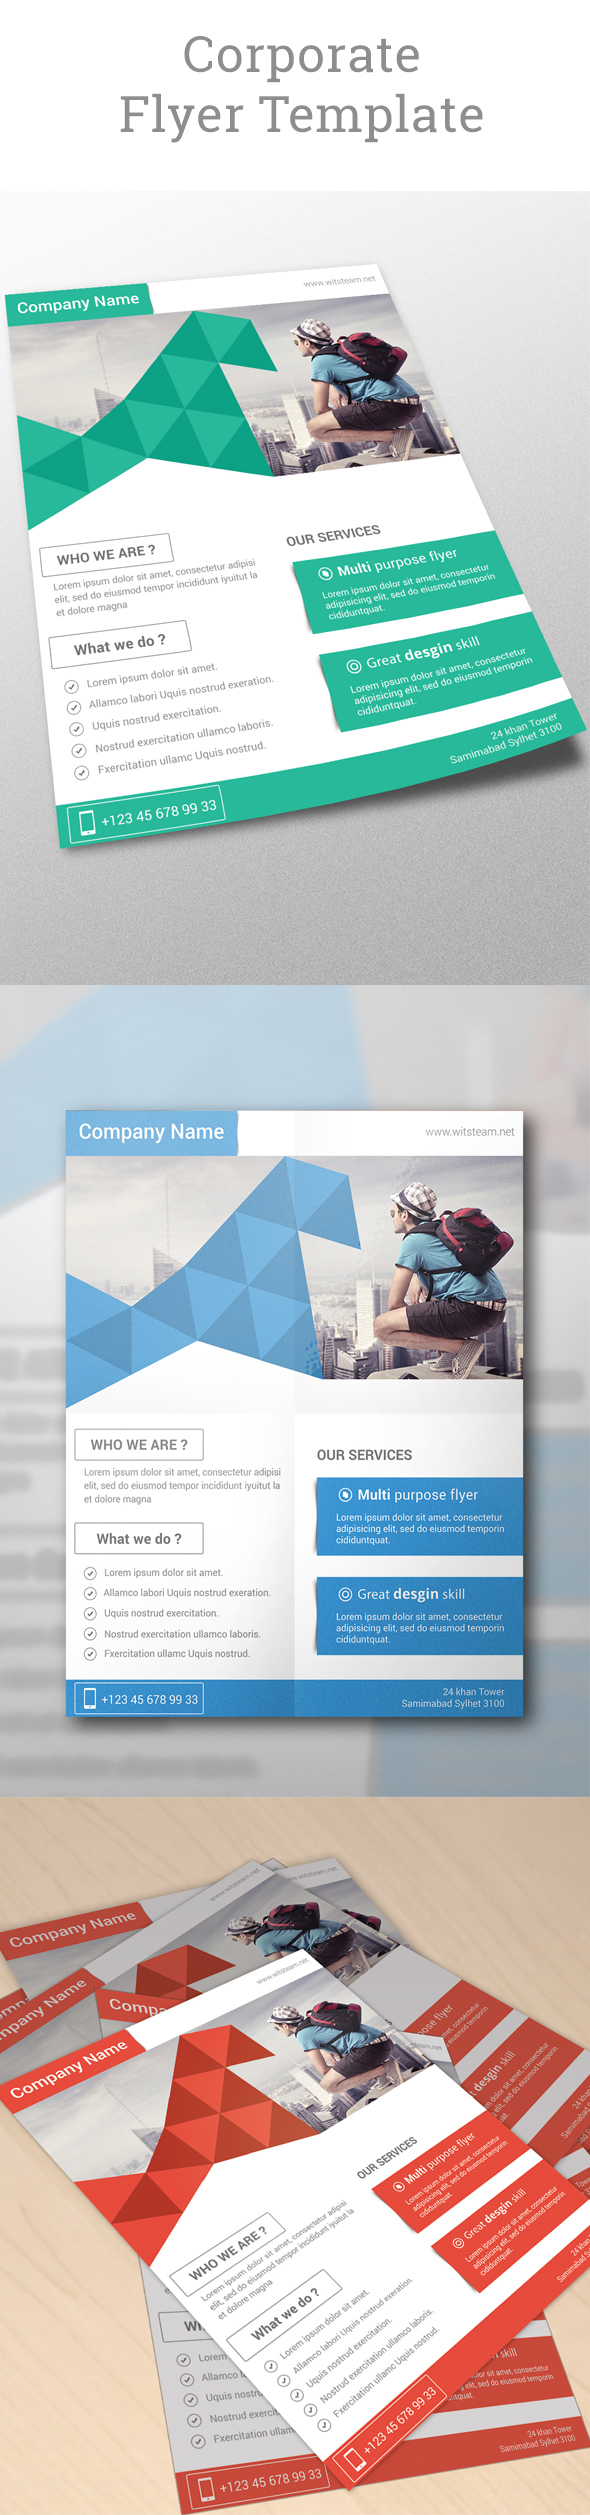 free corporate flyer template mockup